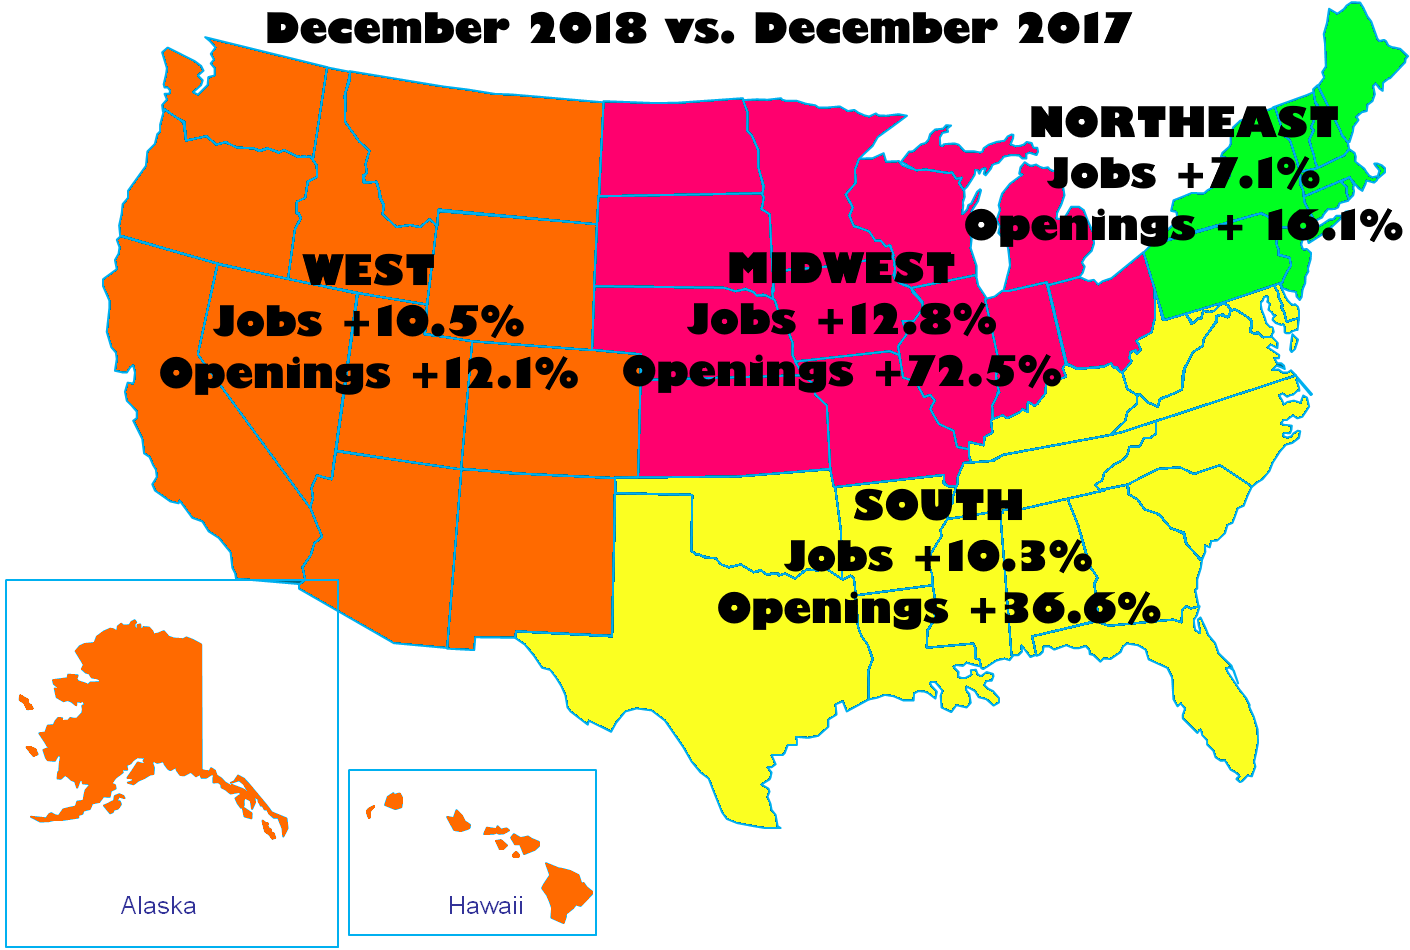 December 2017 to December 2018 growth by region for SEO job openings and SEO jobs on LinkedIn. West jobs grew by 10.5% and openings grew by 12.1%. Midwest jobs grew by 12.8% and openings grew by 72.5%. South jobs grew by 10.3% and openings grew by 36.6%. Northeast jobs grew by 7.1% and openings grew by 16.1%.